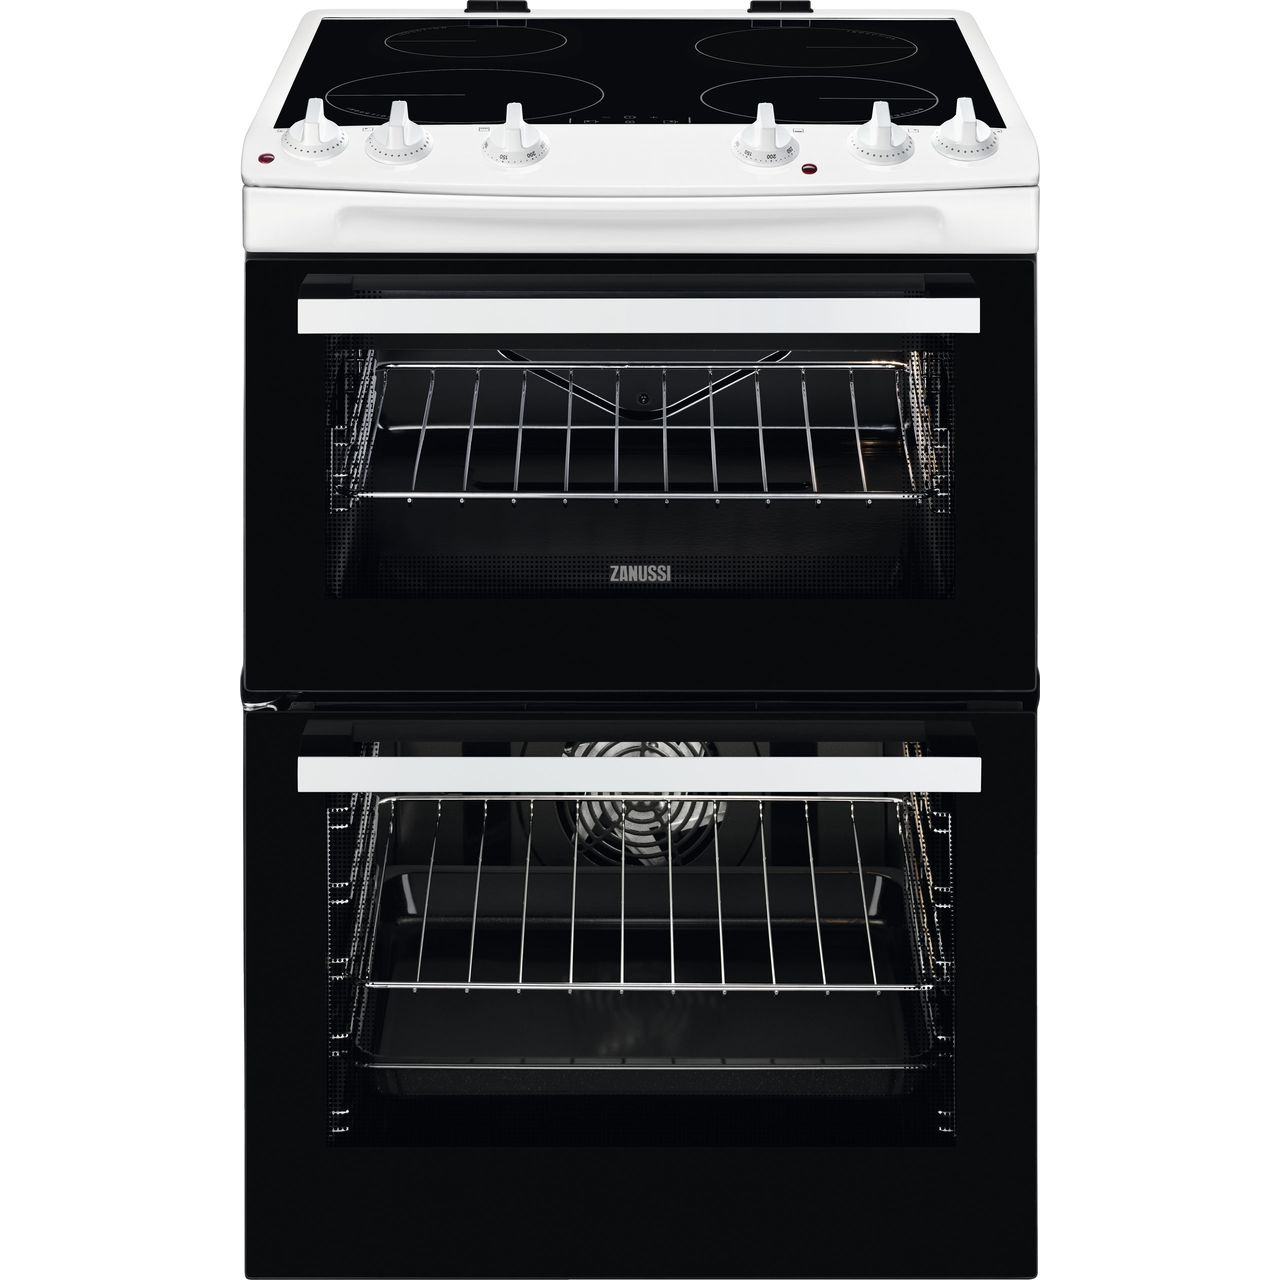 Zanussi ZCI66050WA 60cm Electric Cooker with Induction Hob Review